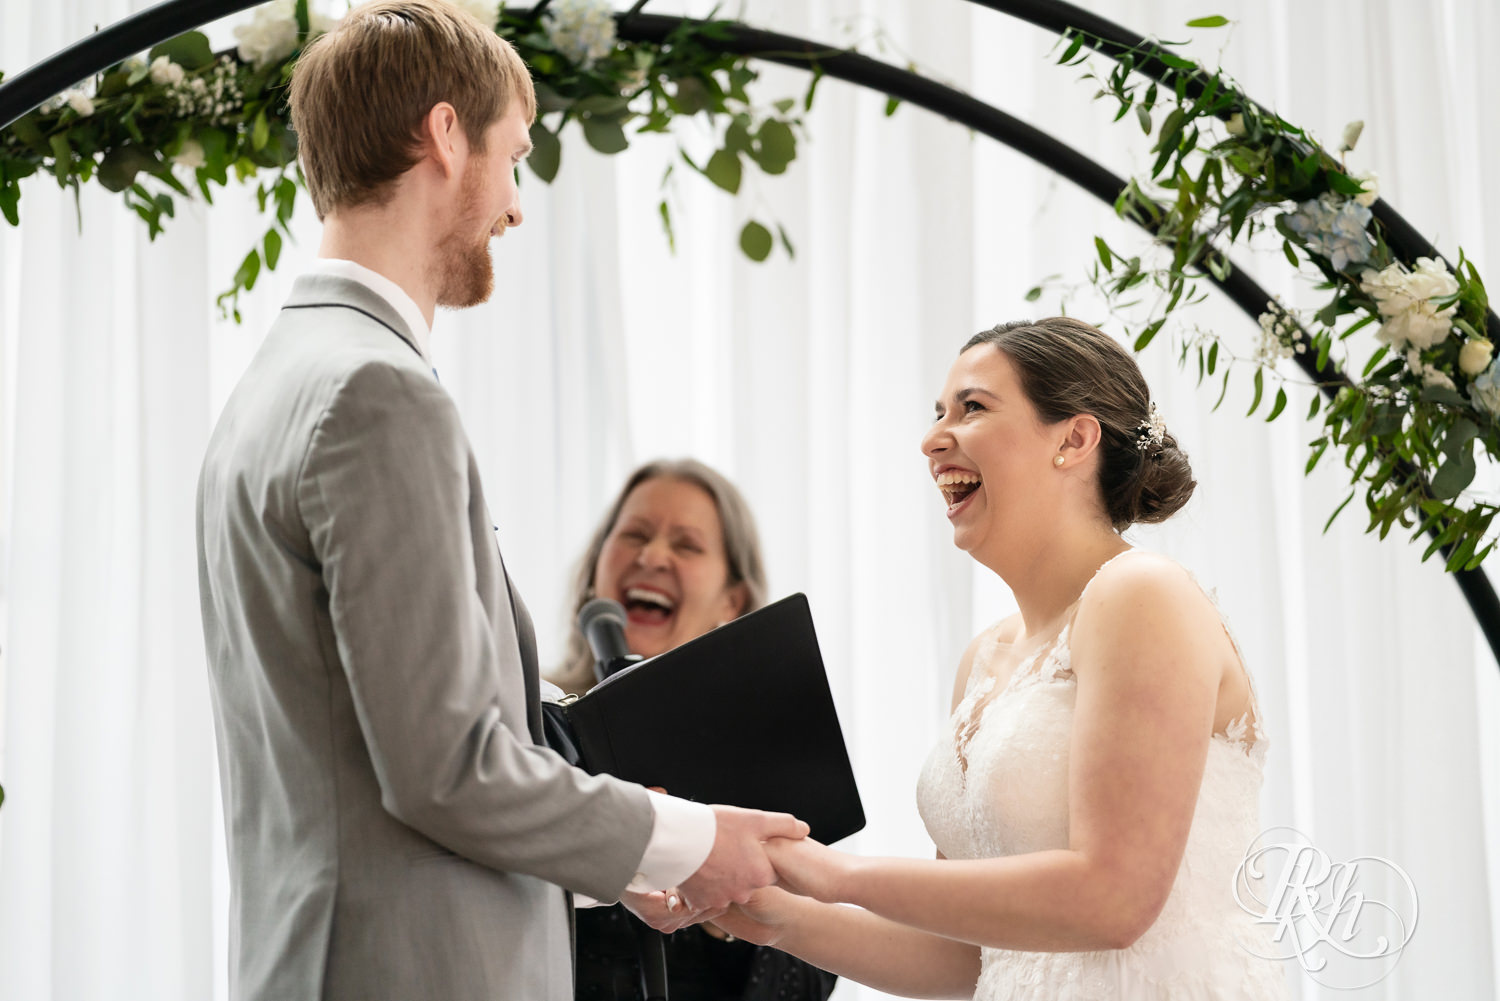 Bride and groom smile during wedding ceremony at Doubletree Hilton Saint Paul in Saint Paul, Minnesota.